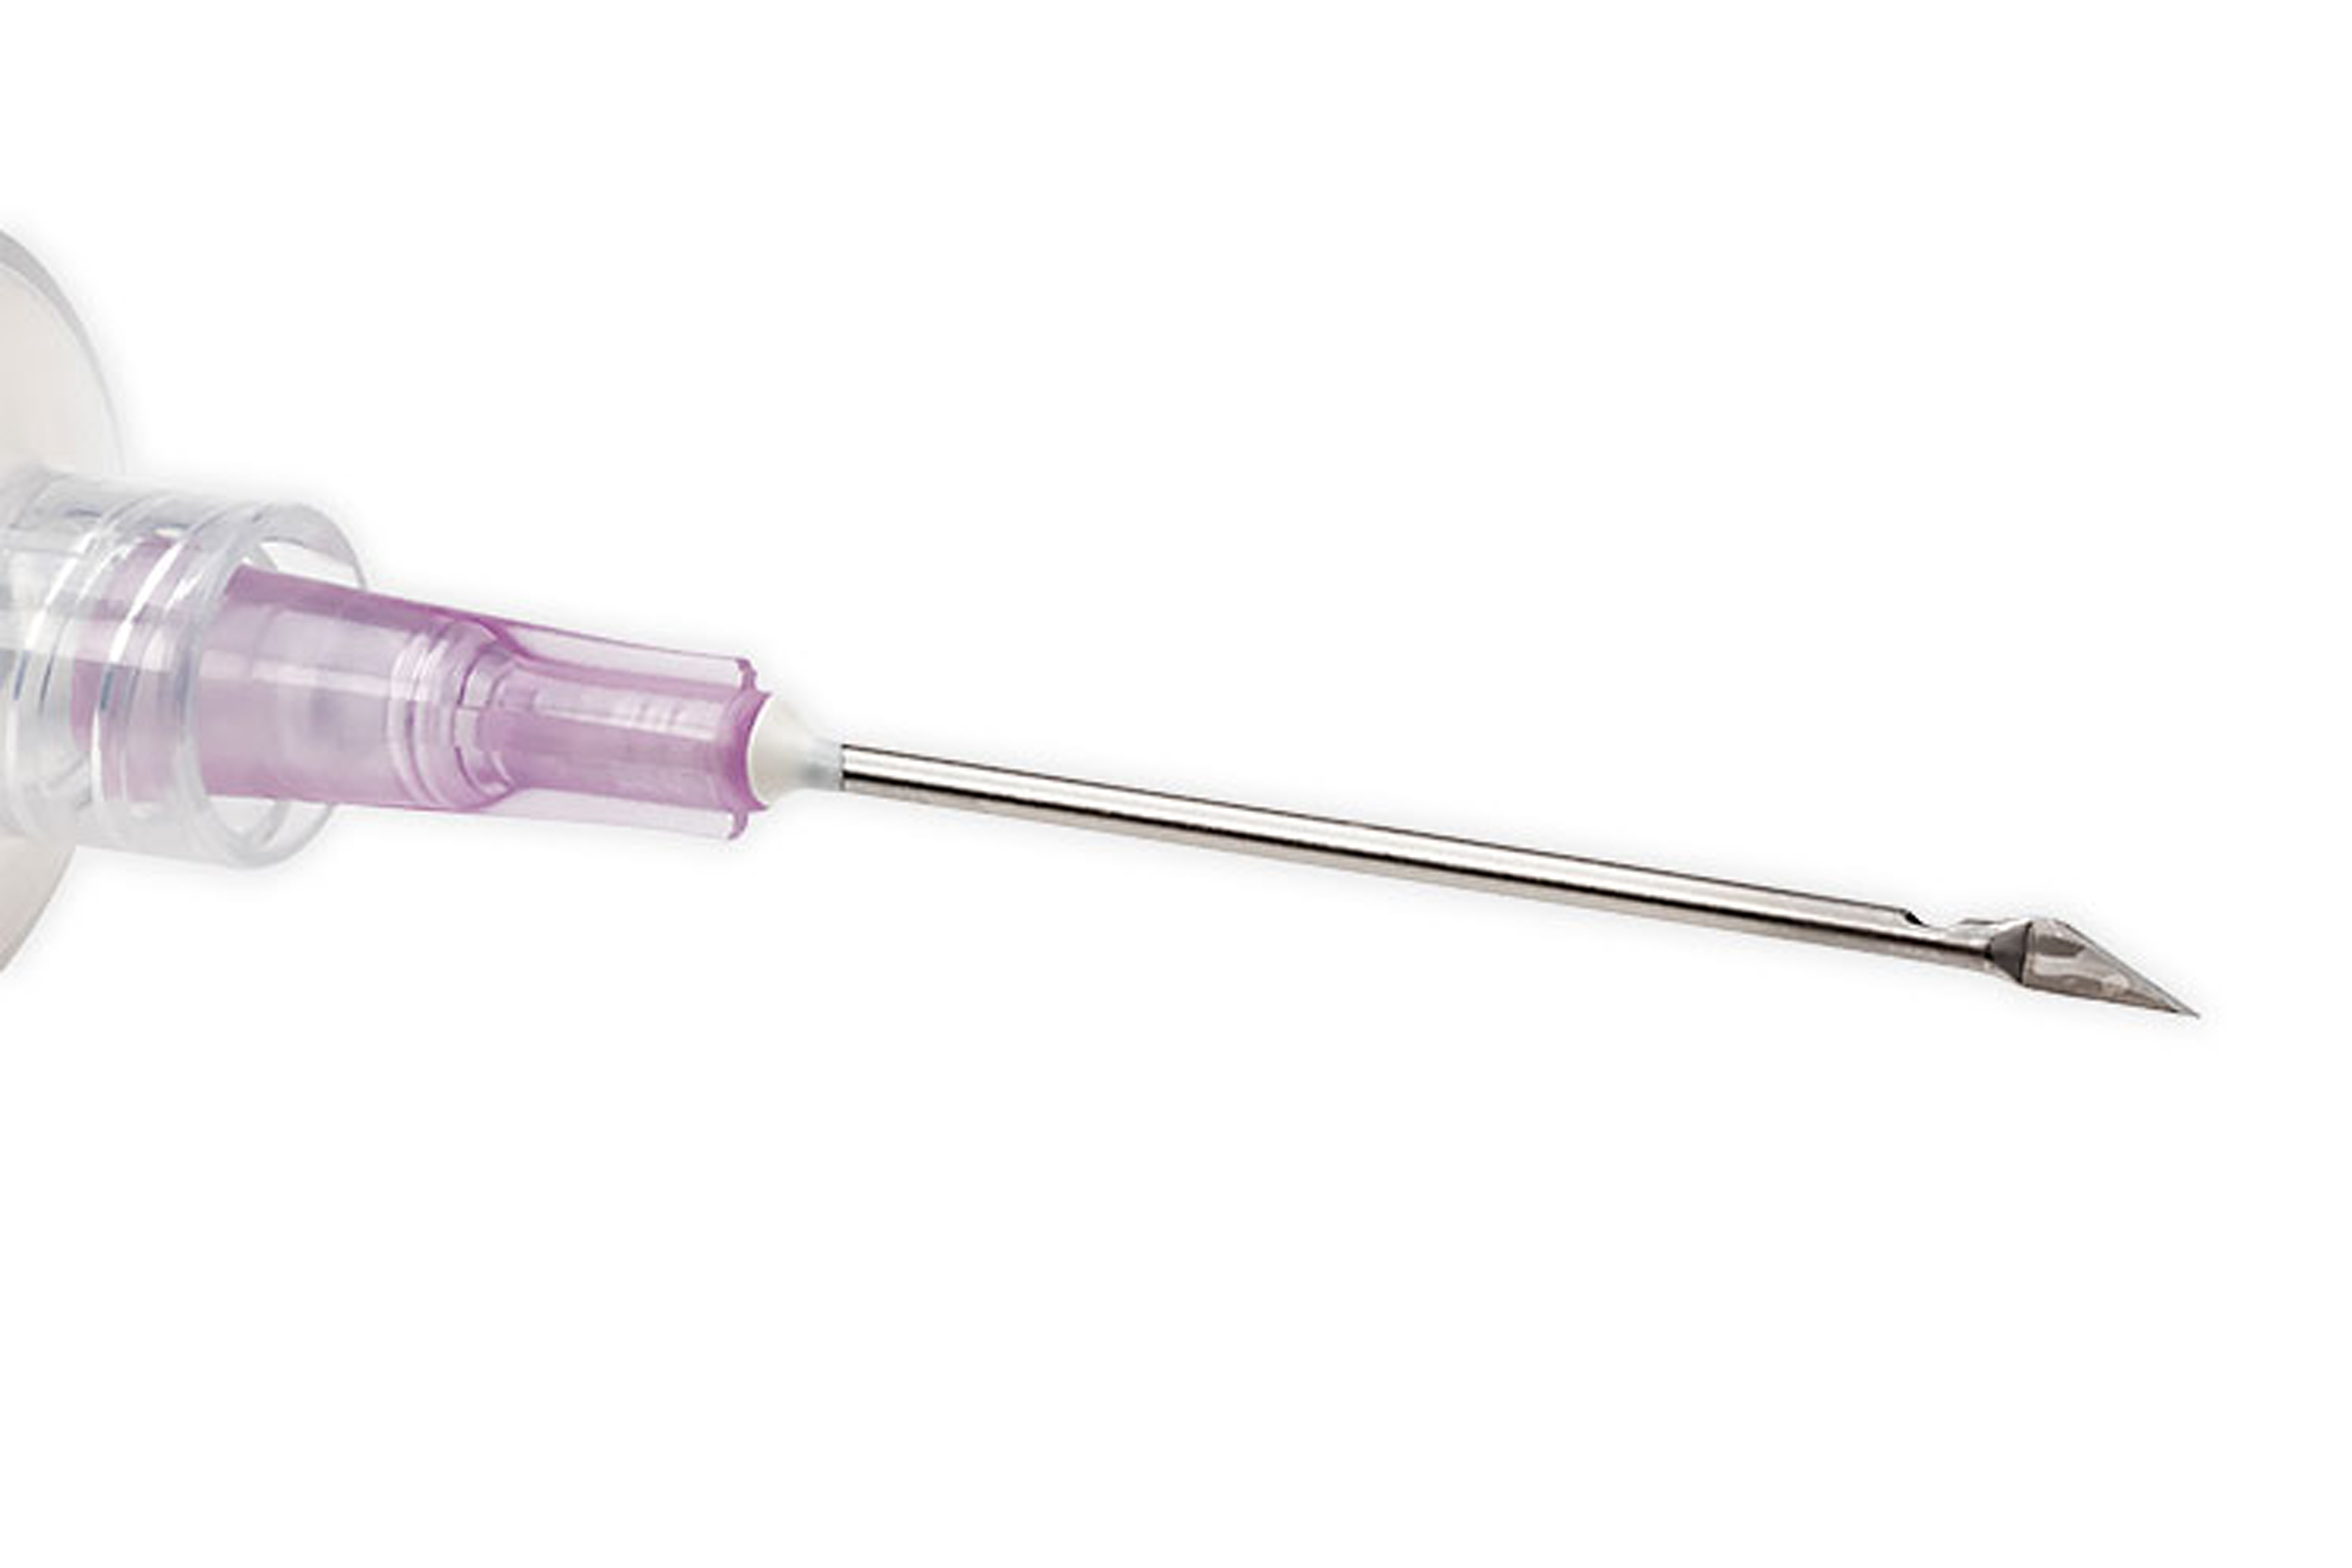 Who are the world's biggest needle and syringe manufacturers?